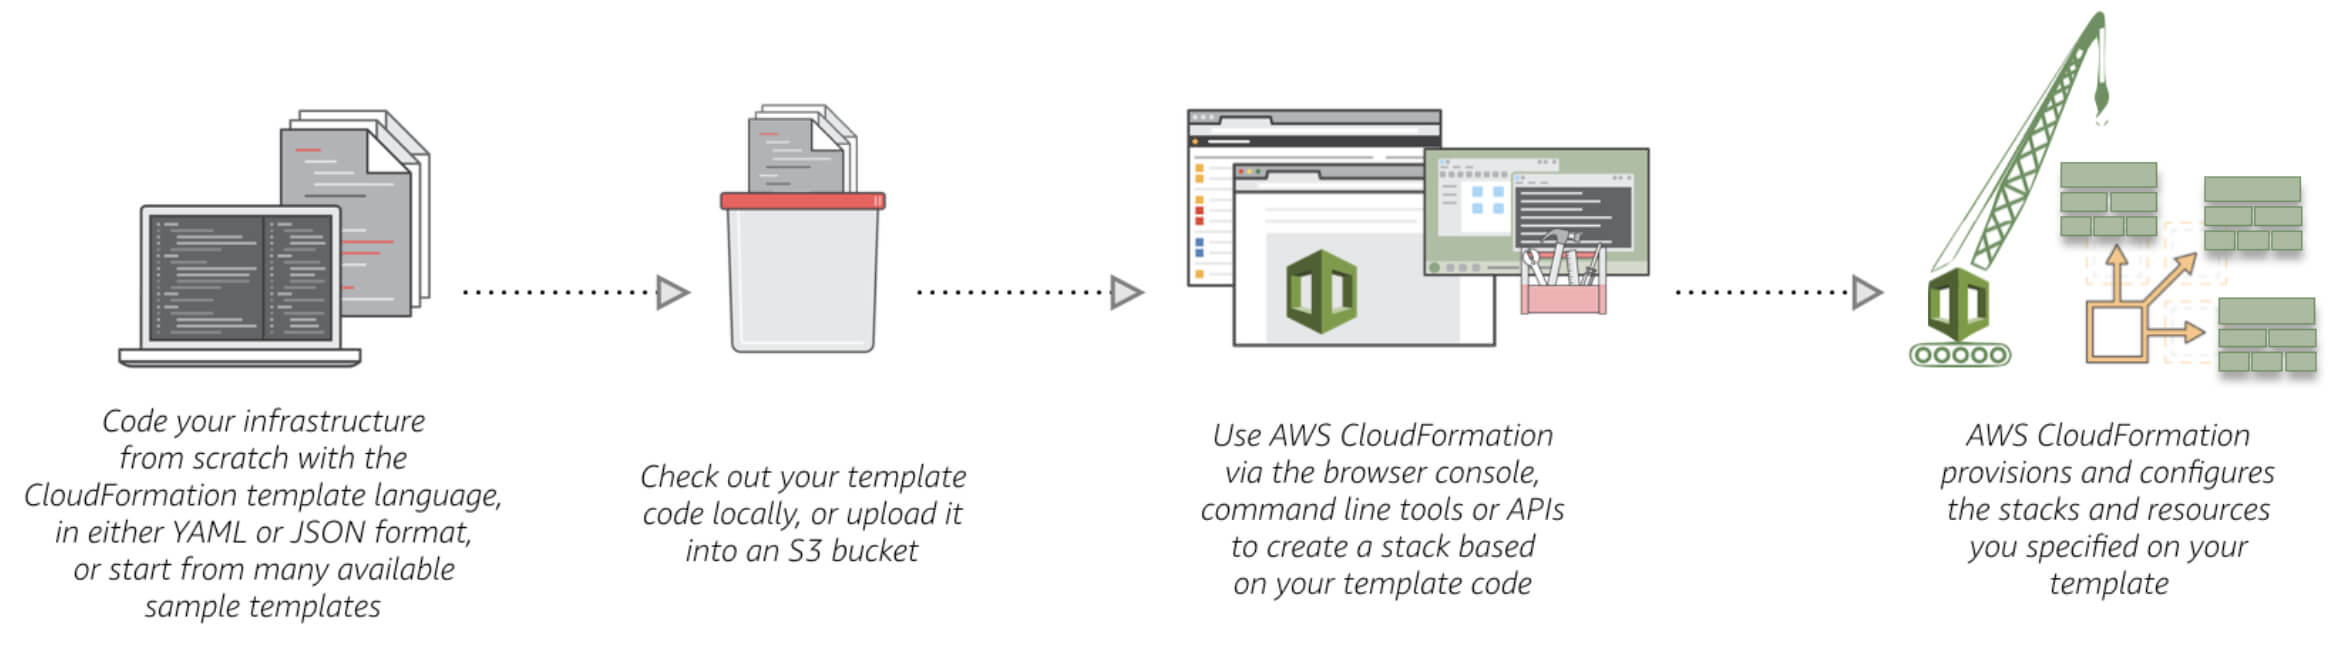 Aws Cloudformation Basics To Know Before Provisioning Your Inside Aws Cloud Formation Template